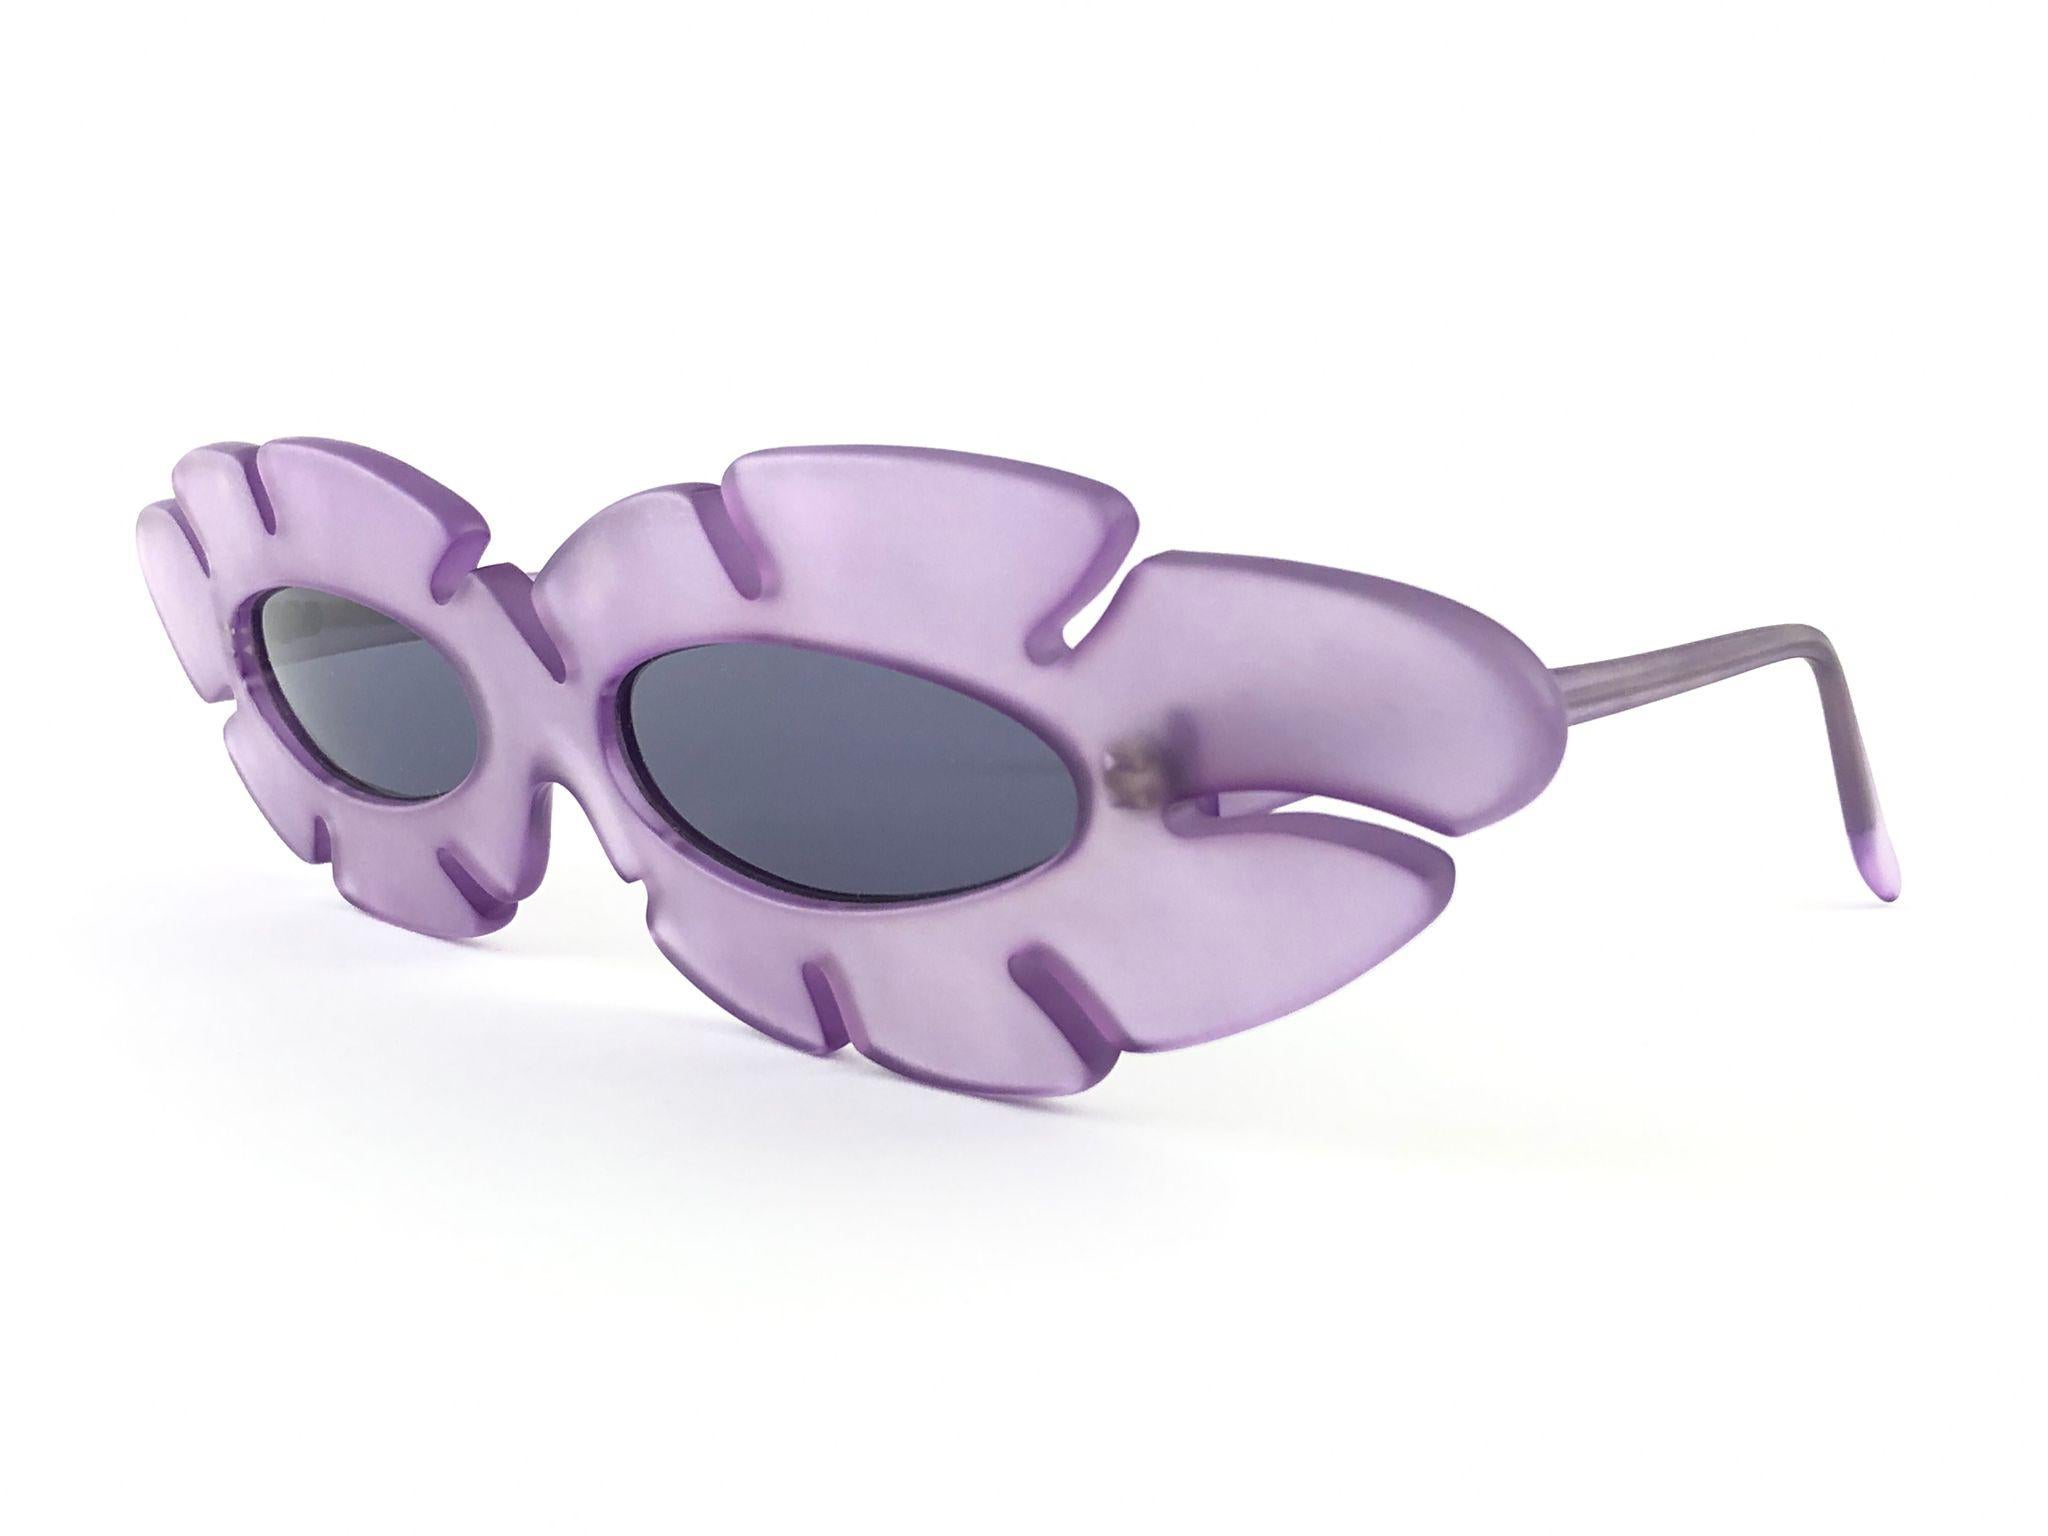 New Vintage Alain Mikli ultra wide translucent light purple frame.

Rare item in new and unworn condition. Spotless grey lenses.

Please consider that this item is nearly 40 years old so it could show minor sign of wear due to storage.

Made in